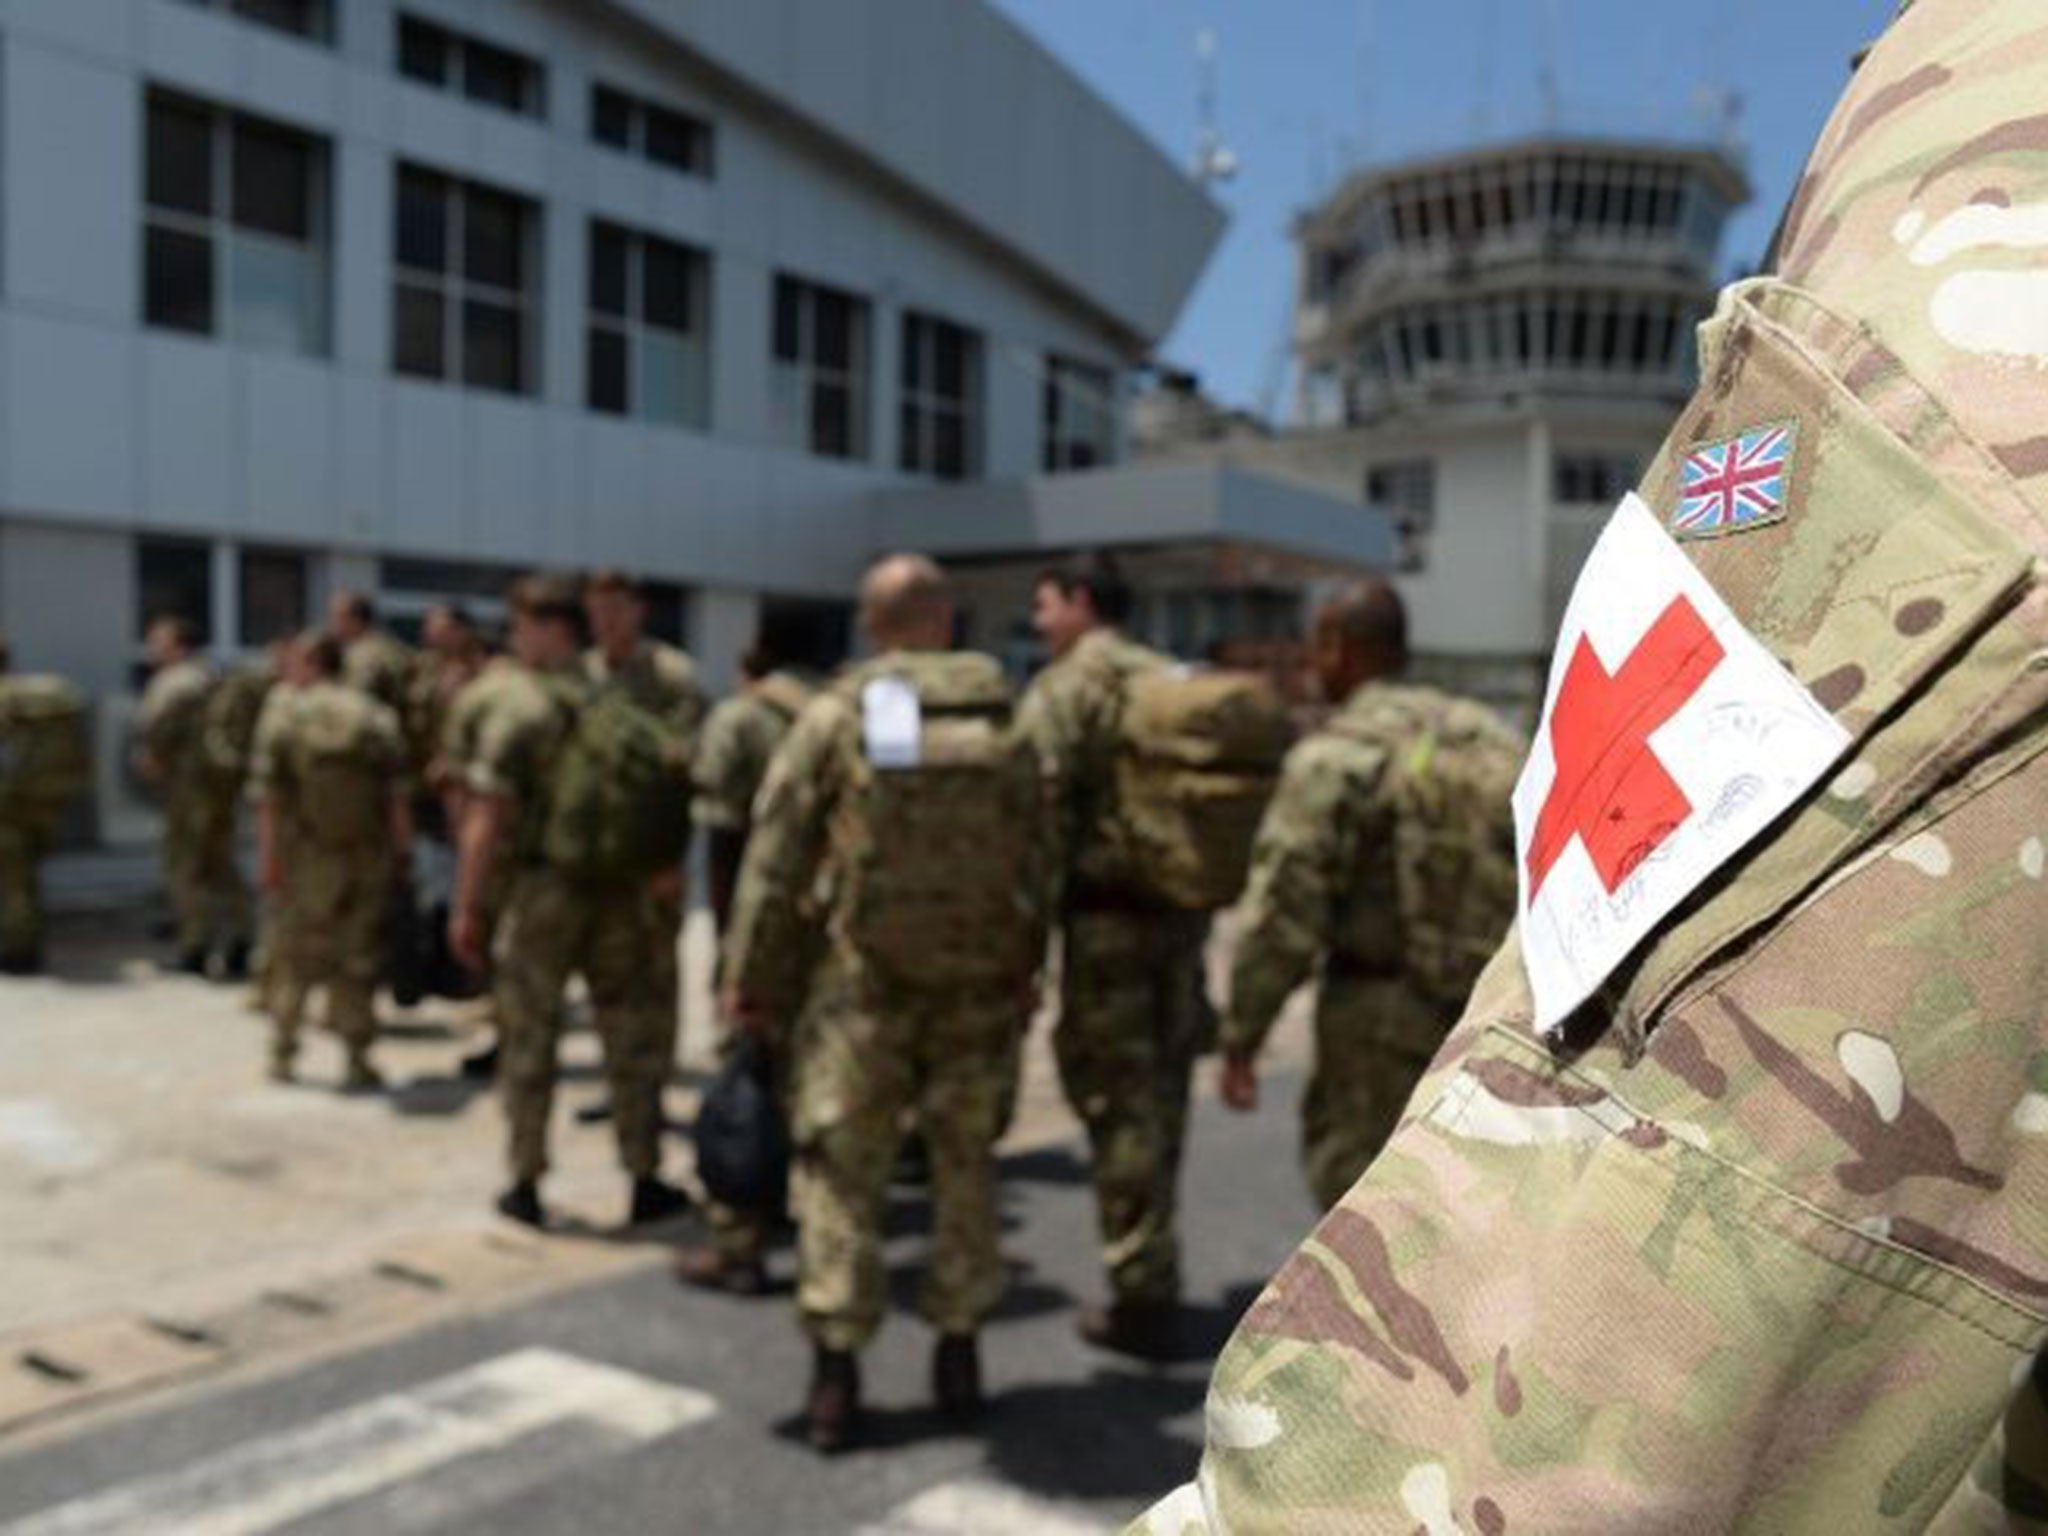 British troops arriving in Sierra Leone last month to help with the Ebola crisis